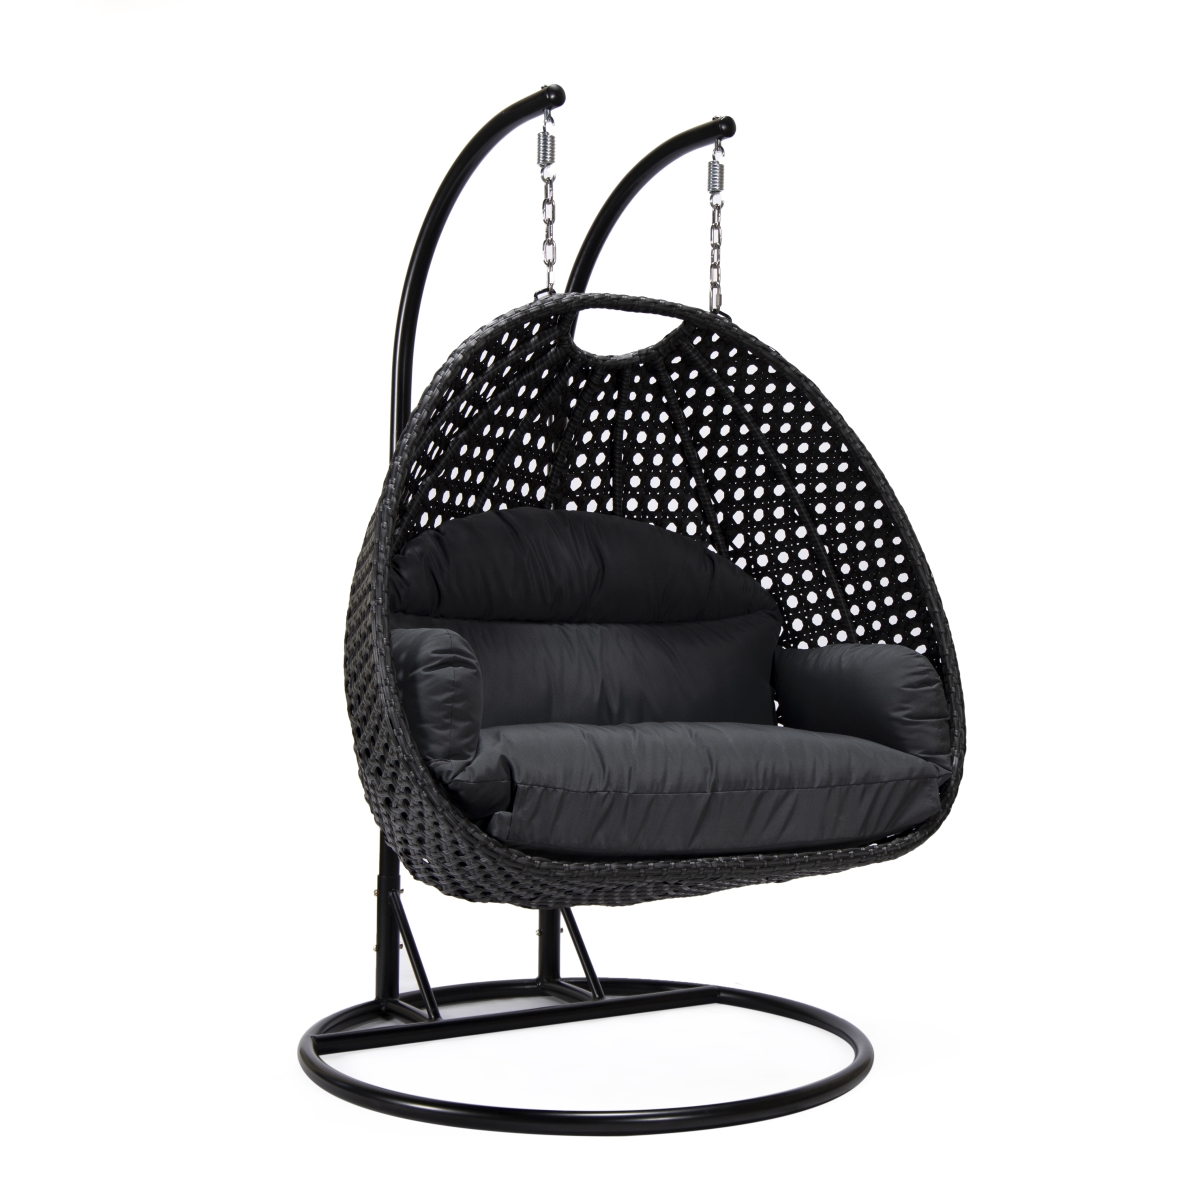 Picture of Leisure Mod MSCCH-53DGR Mendoza Wicker Hanging 2 Person Egg Swing Chair with Dark Grey Cushion, Charcoal